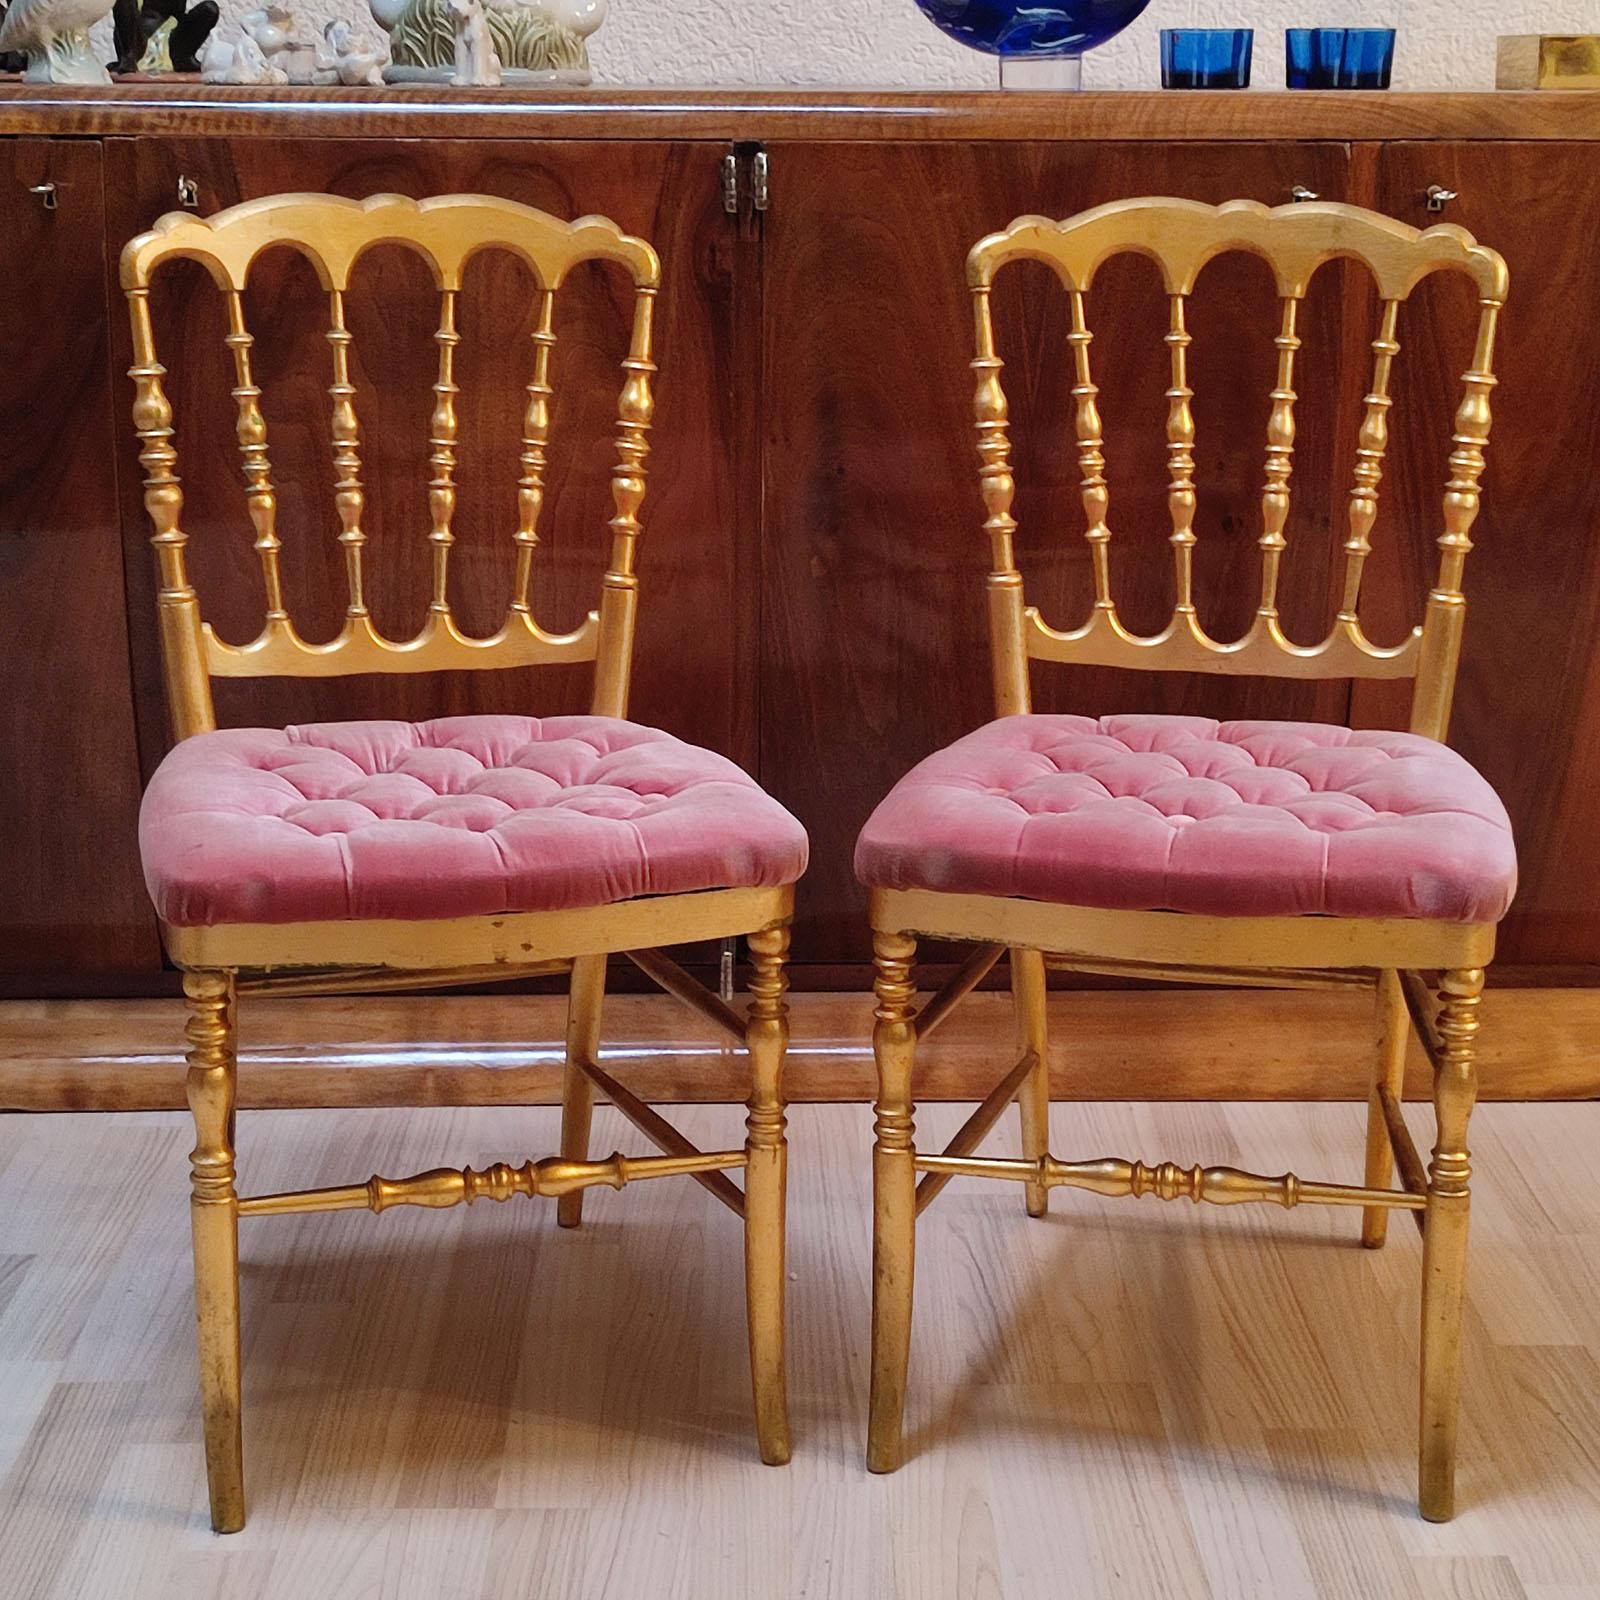 Early Chiavari side chairs from around 1890. Good original condition with normal wear. Missing 2 buttons. Some fading to the gilding. Chiavari chairs have been charming and have delighted for almost 200 years.
Dimensions: 42 x 45 x 82 cm.